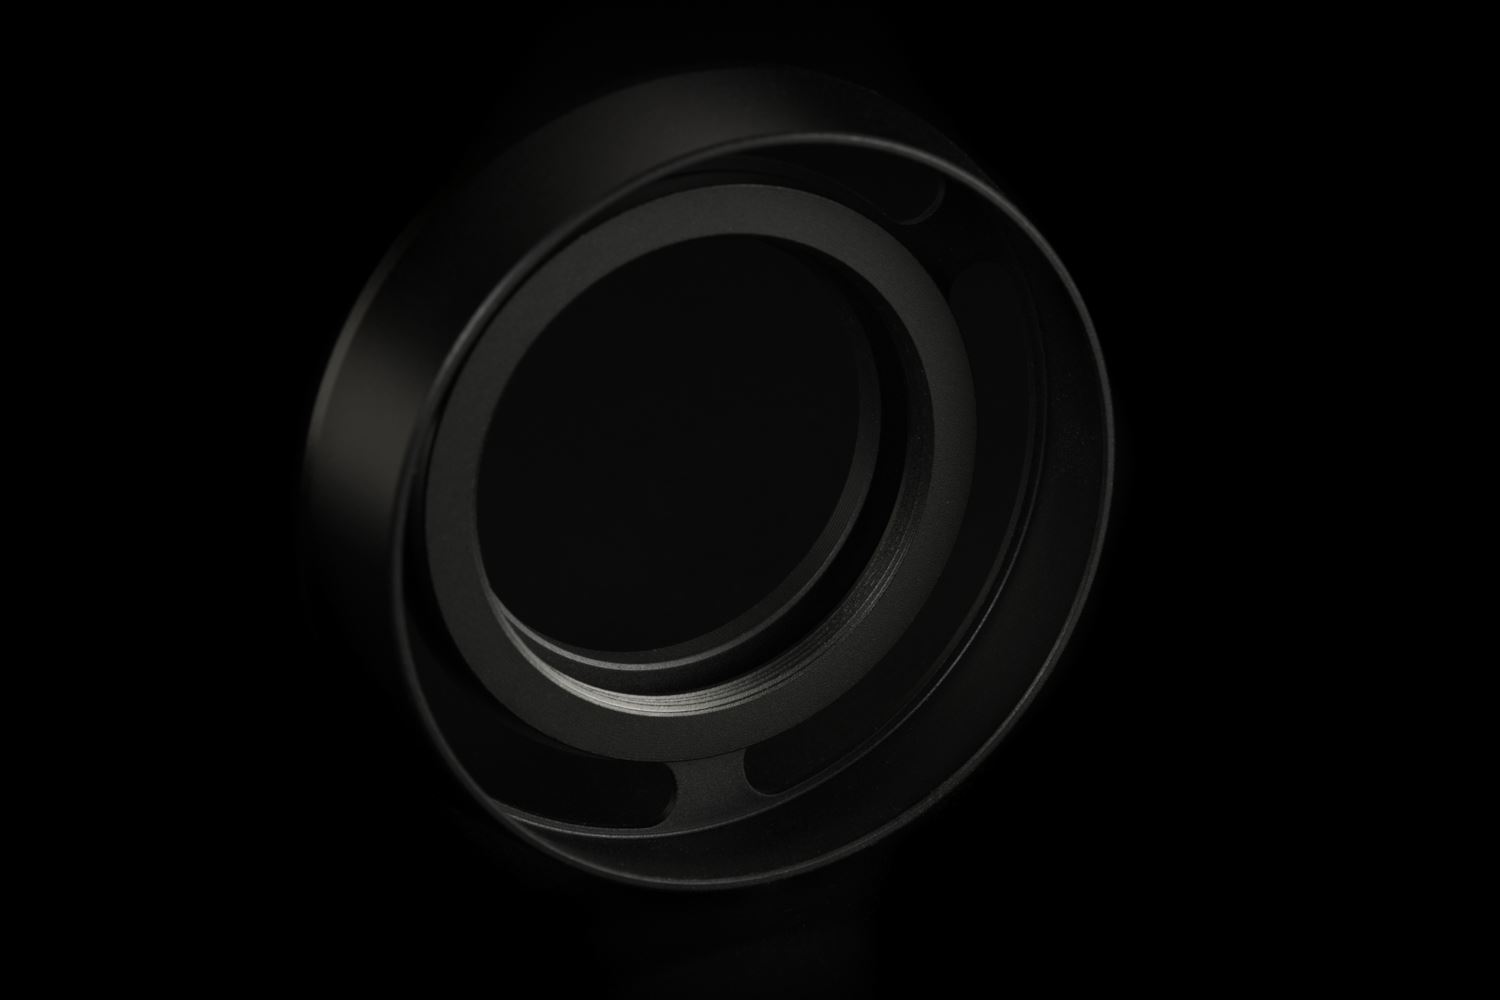 Picture of Black Ventilated Lens Hood made for Leica E39 lenses